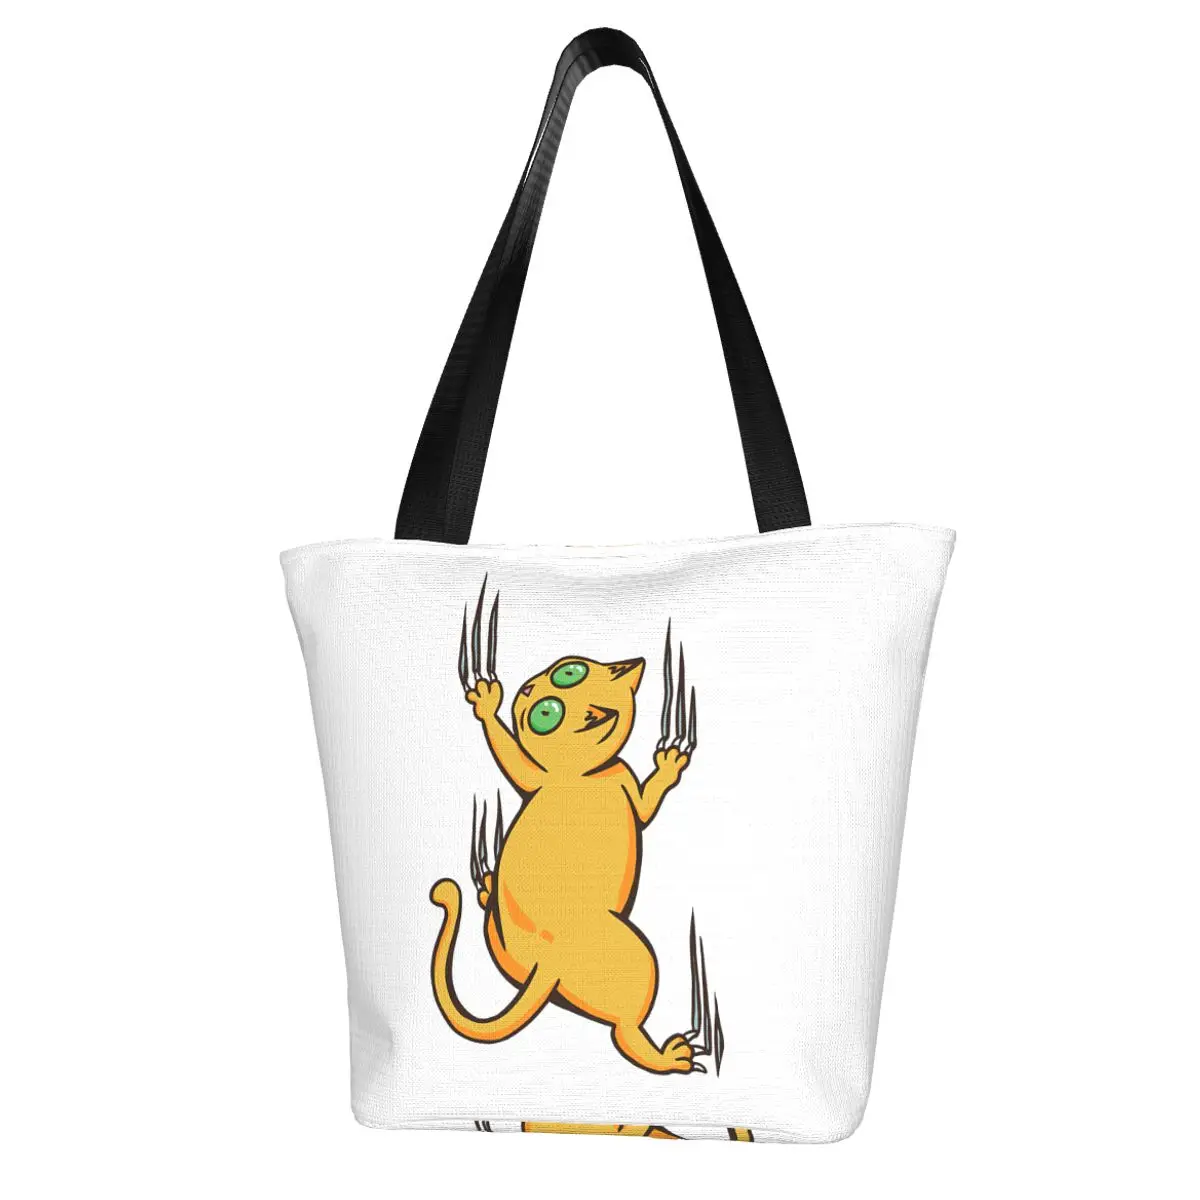 Funny Cartoon Cat Climbing With Scratches Shopping Bag Aesthetic Cloth Outdoor Handbag Female Fashion Bags